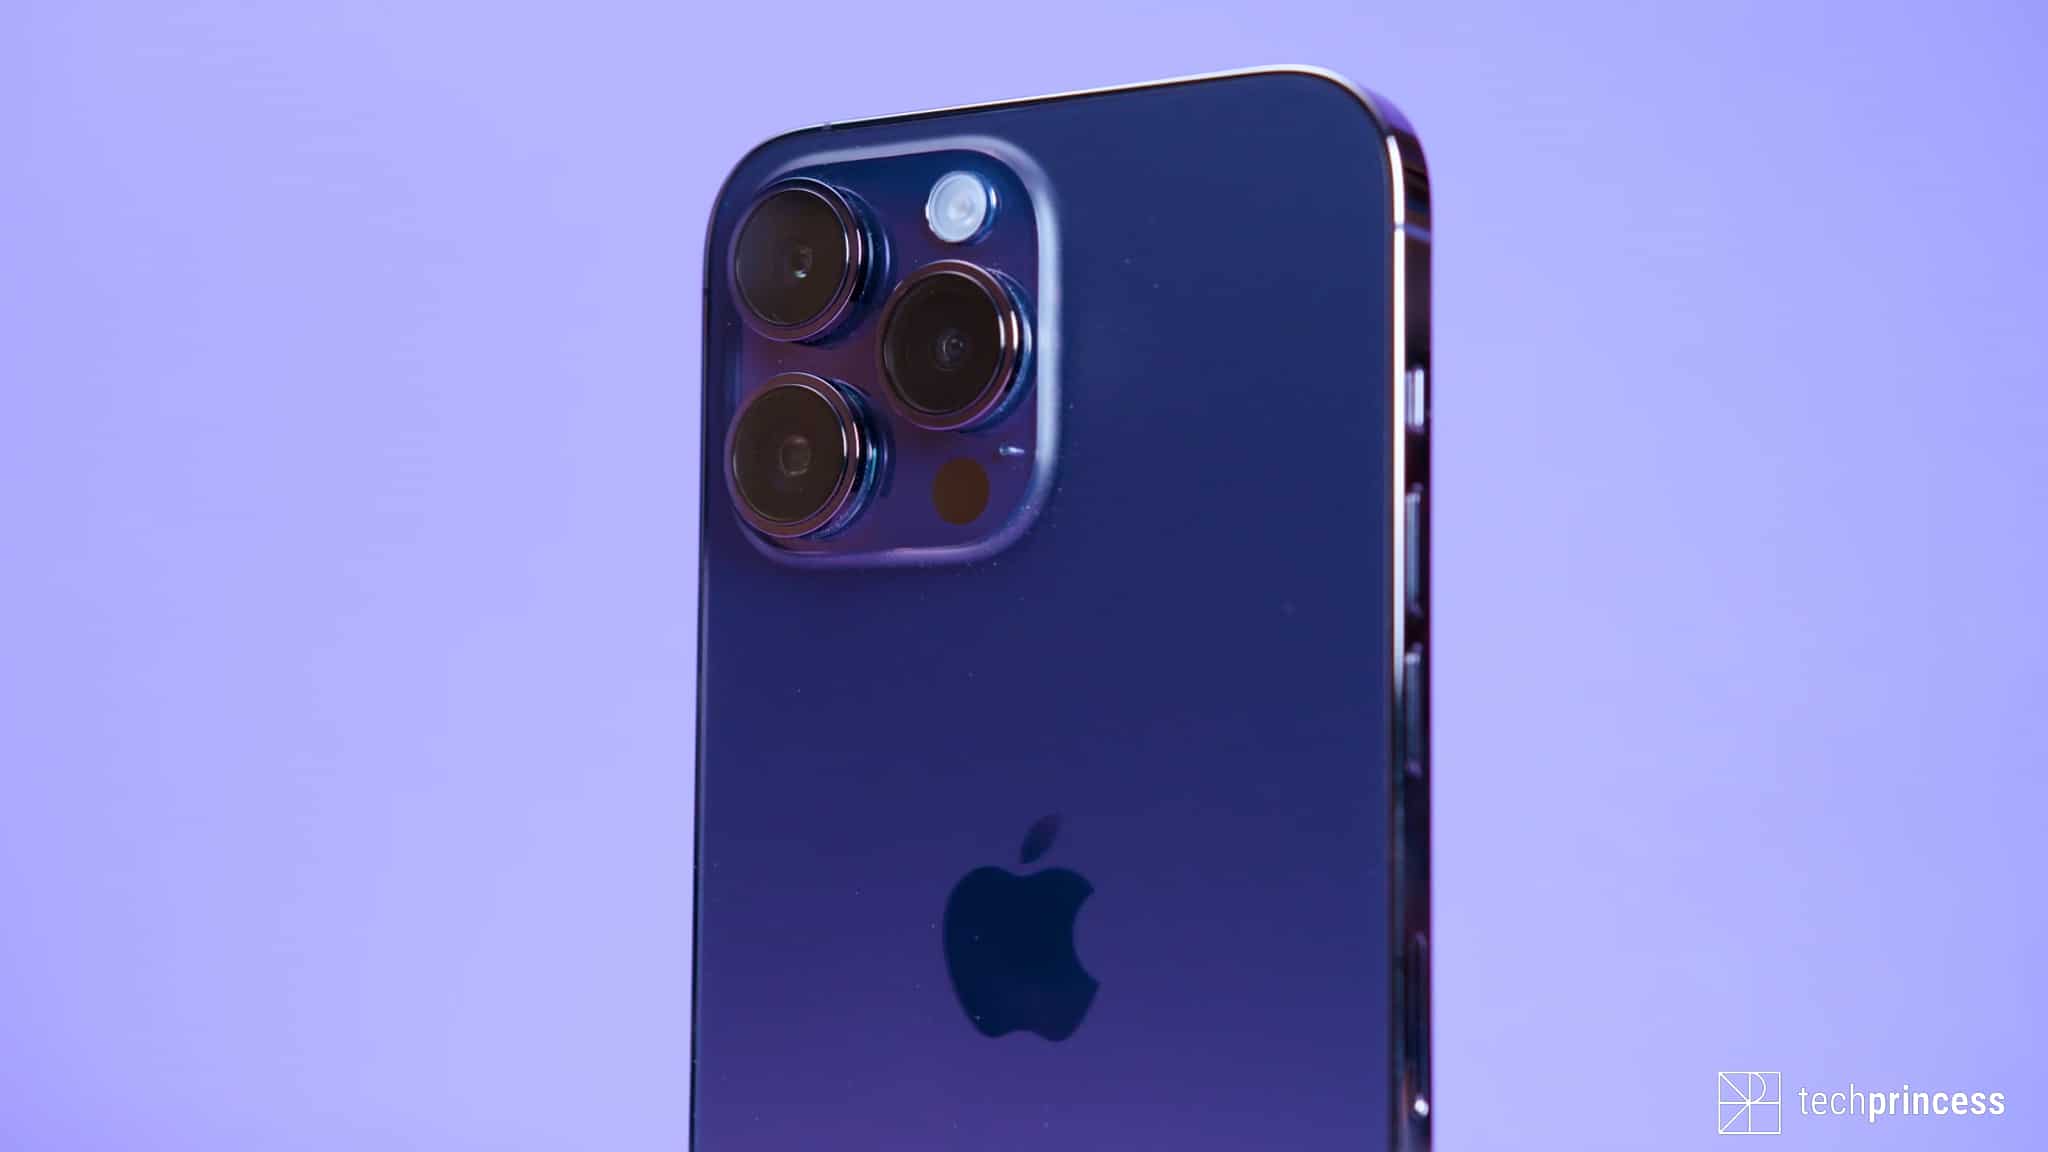 The "Pro Max" iPhones will have an exclusive novelty for the next few years thumbnail